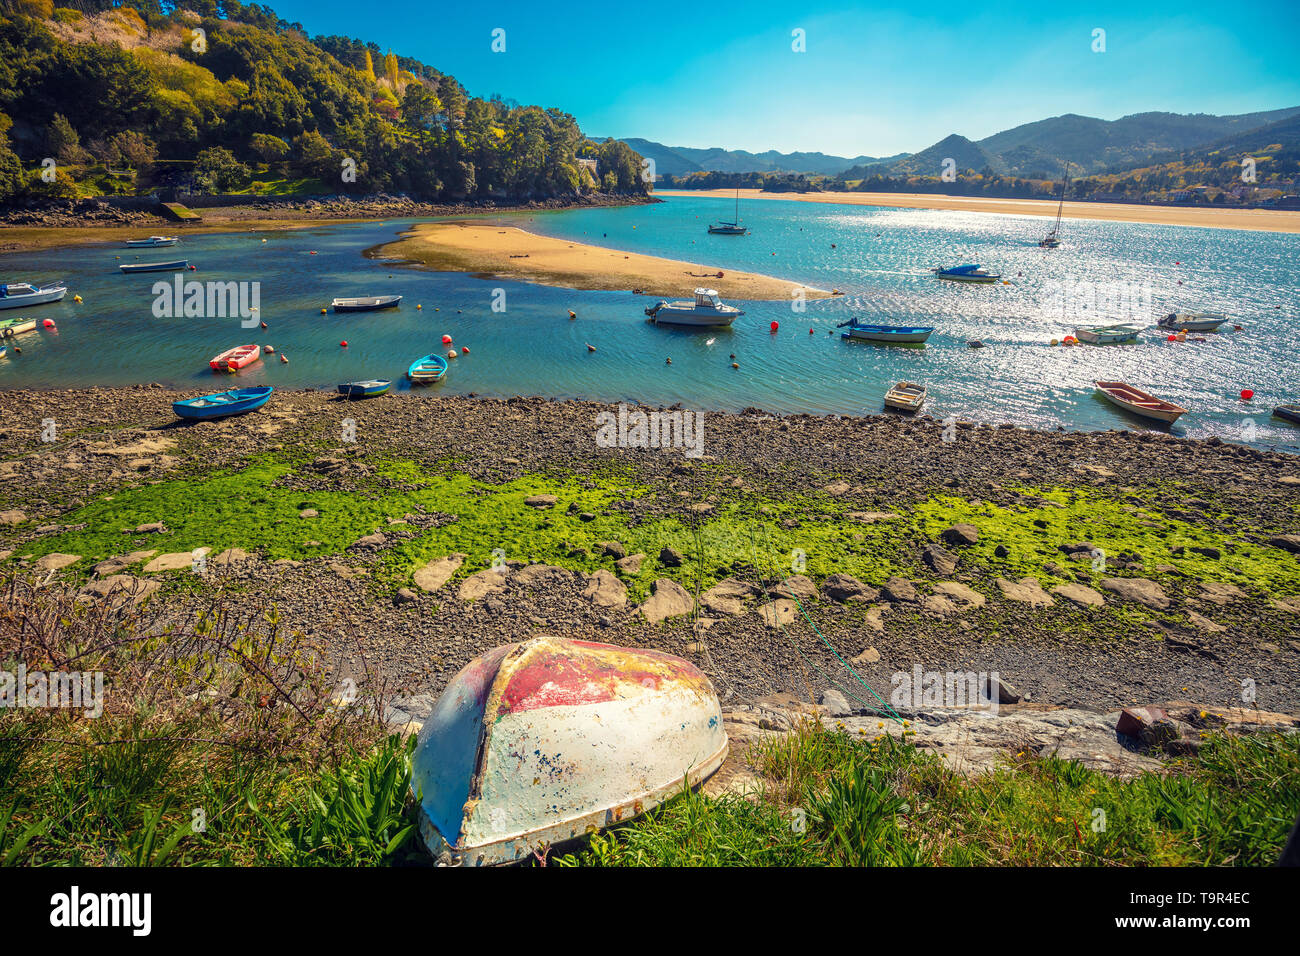 Boats in the bay at low tide. Urdaibai, Biscay, Spain Stock Photo